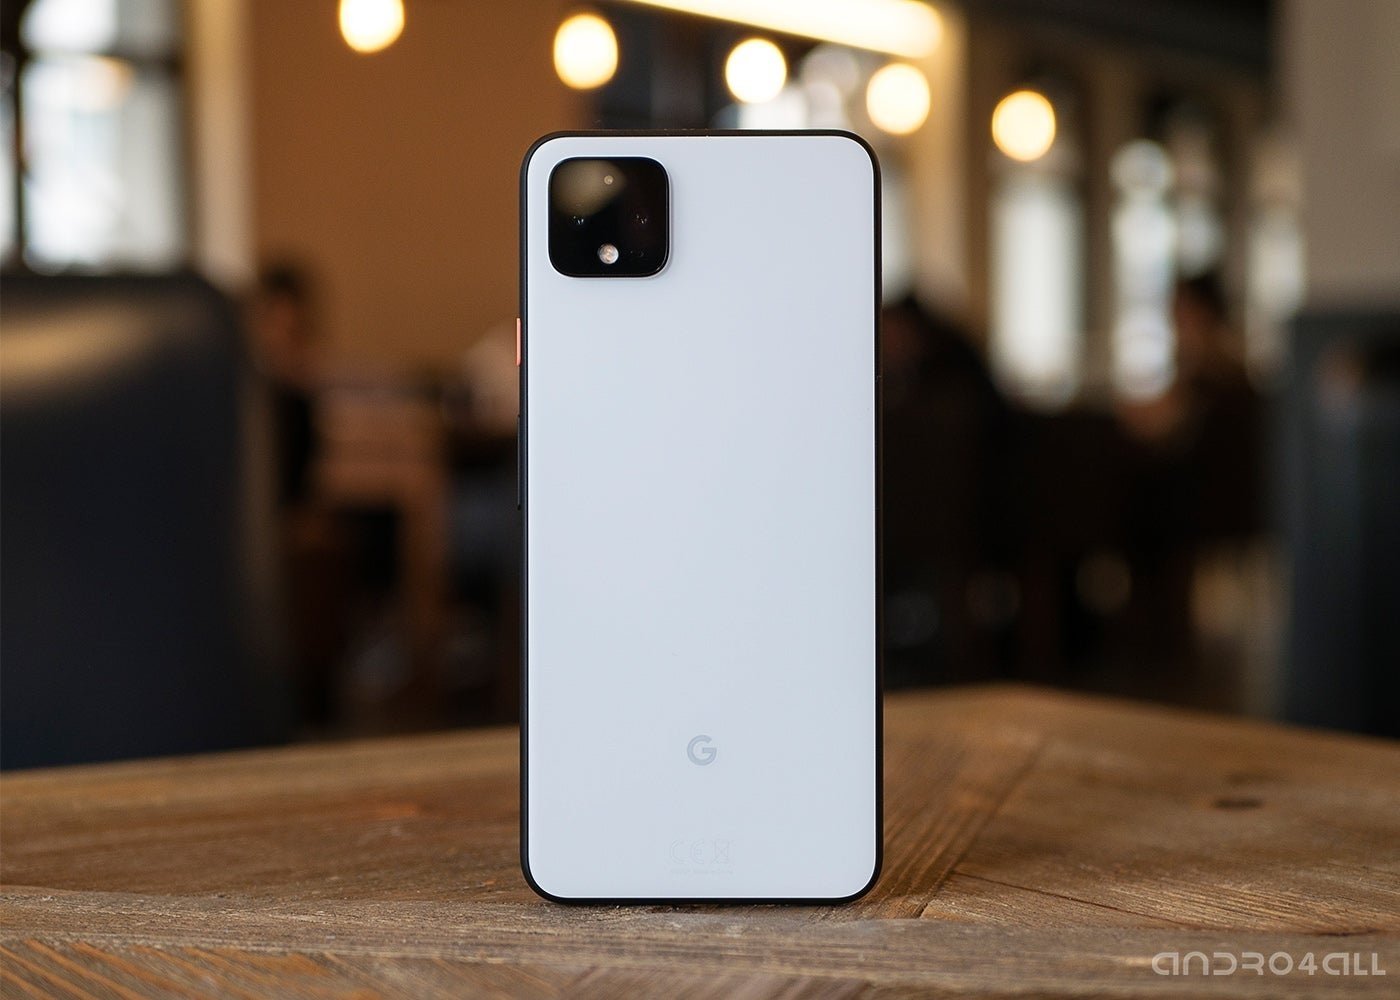 Google Pixel 4 XL, color Clearly White